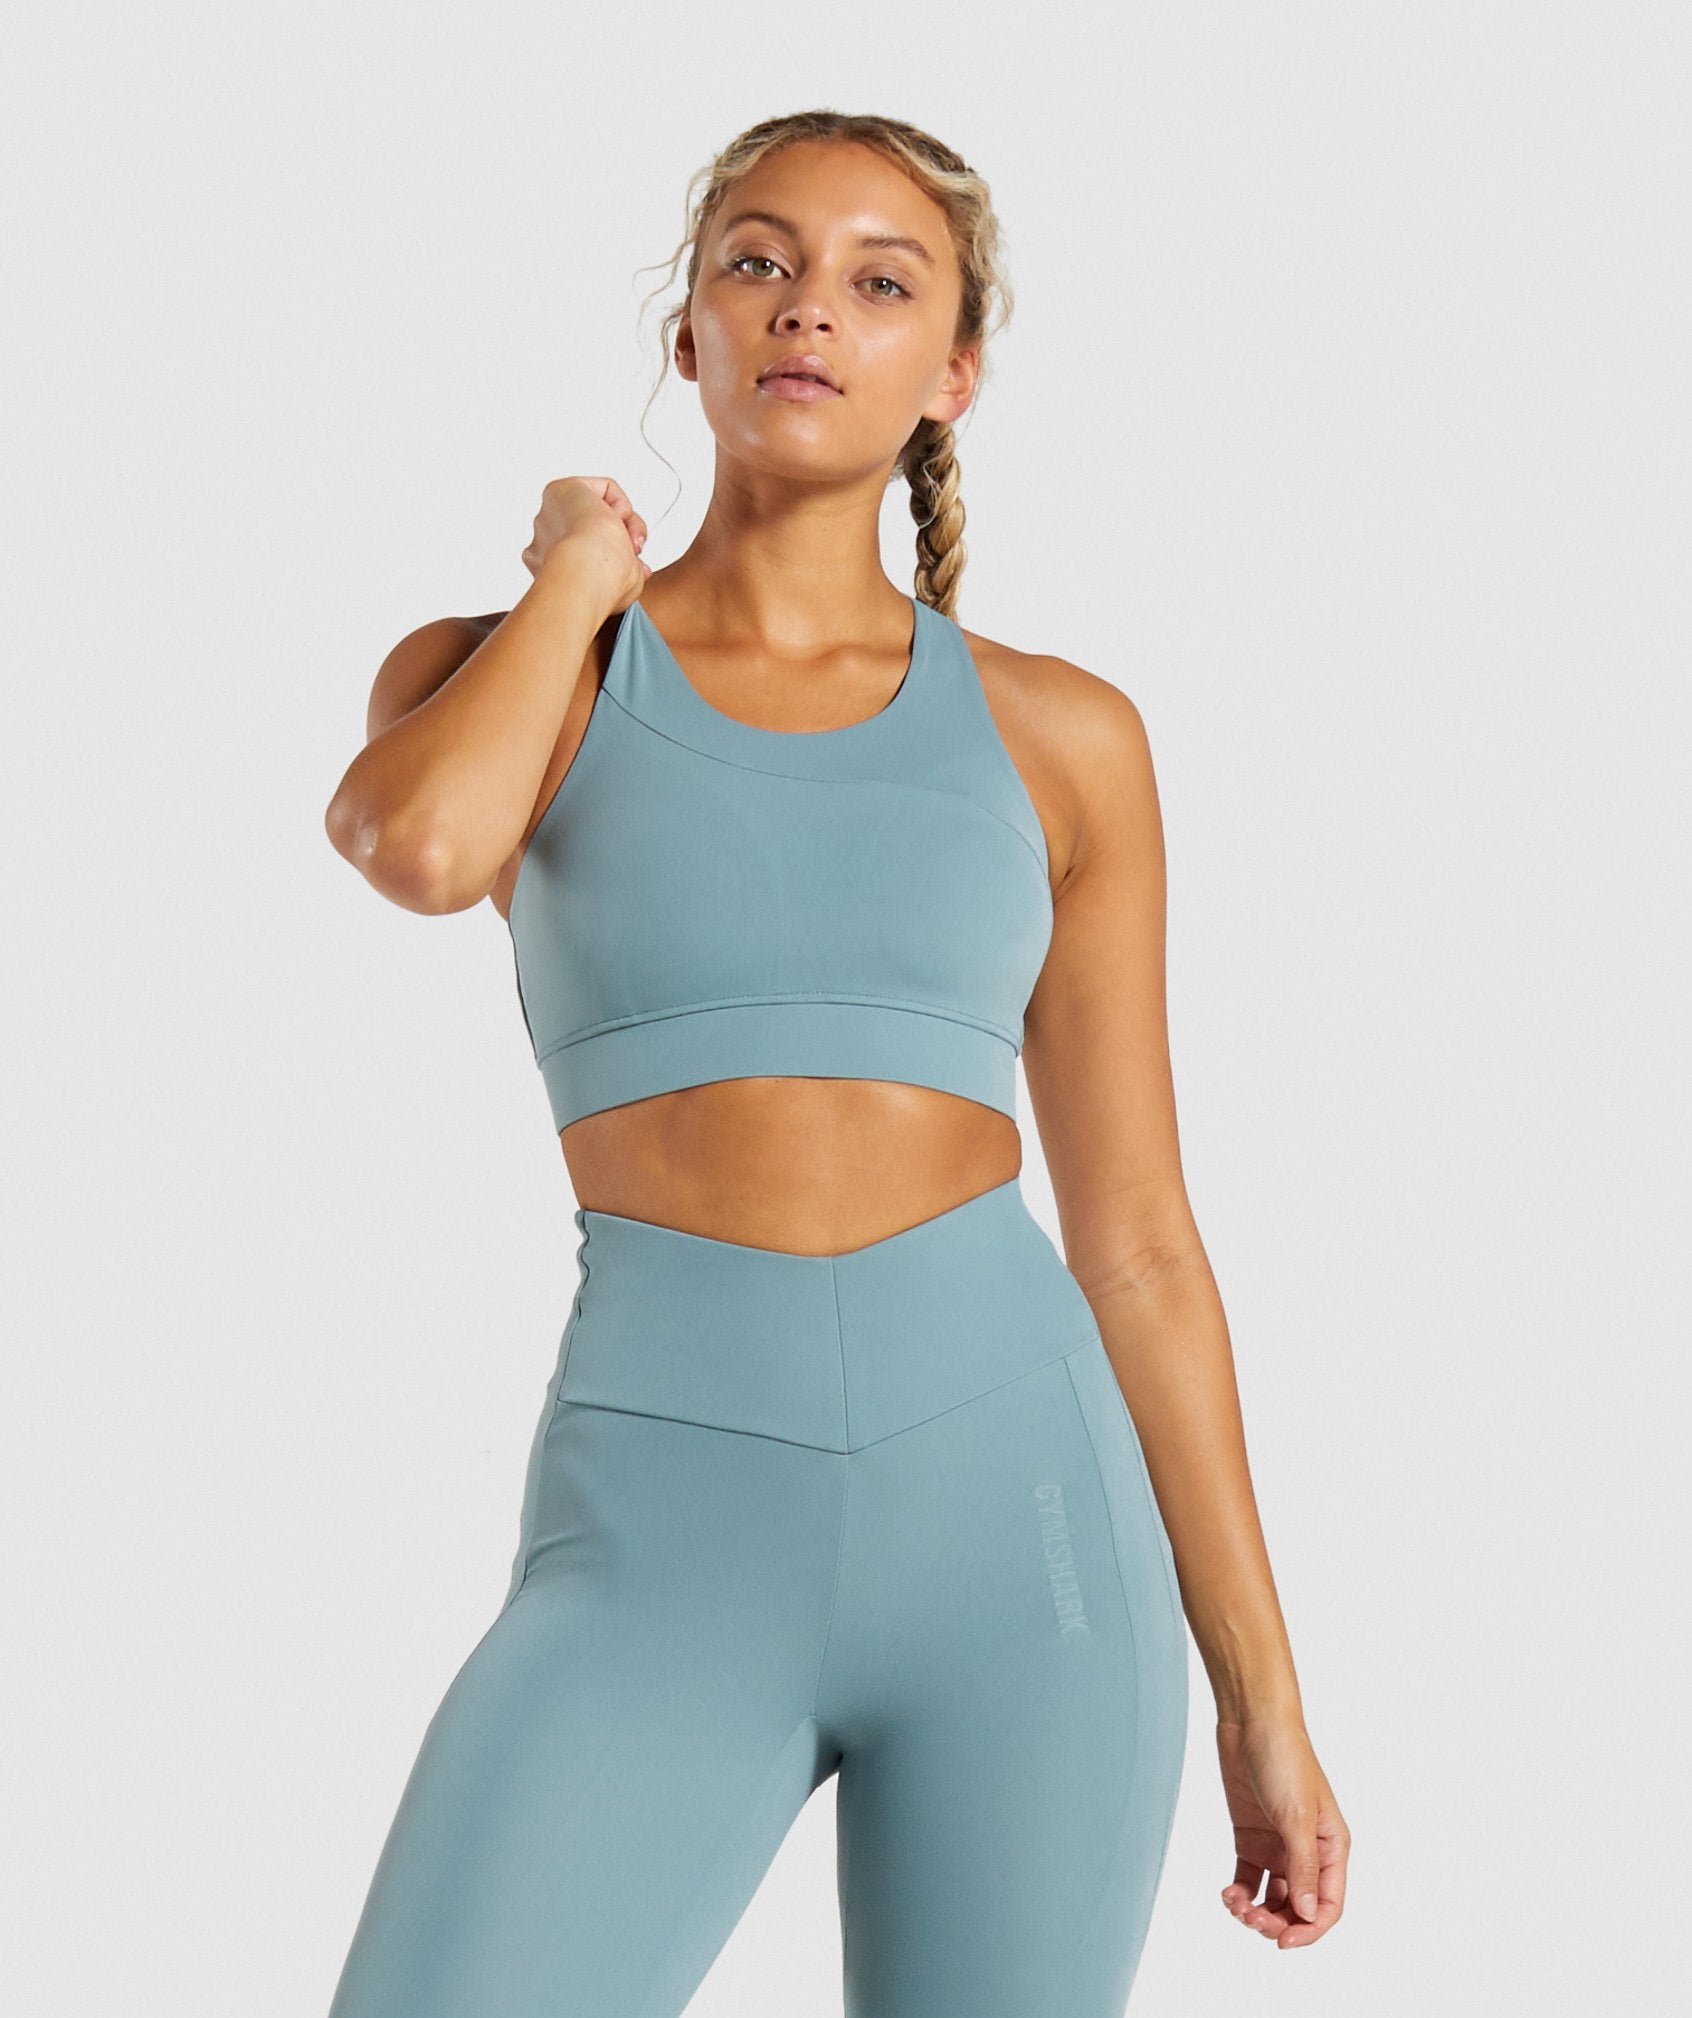 Captivate Sports Bra in Turquoise